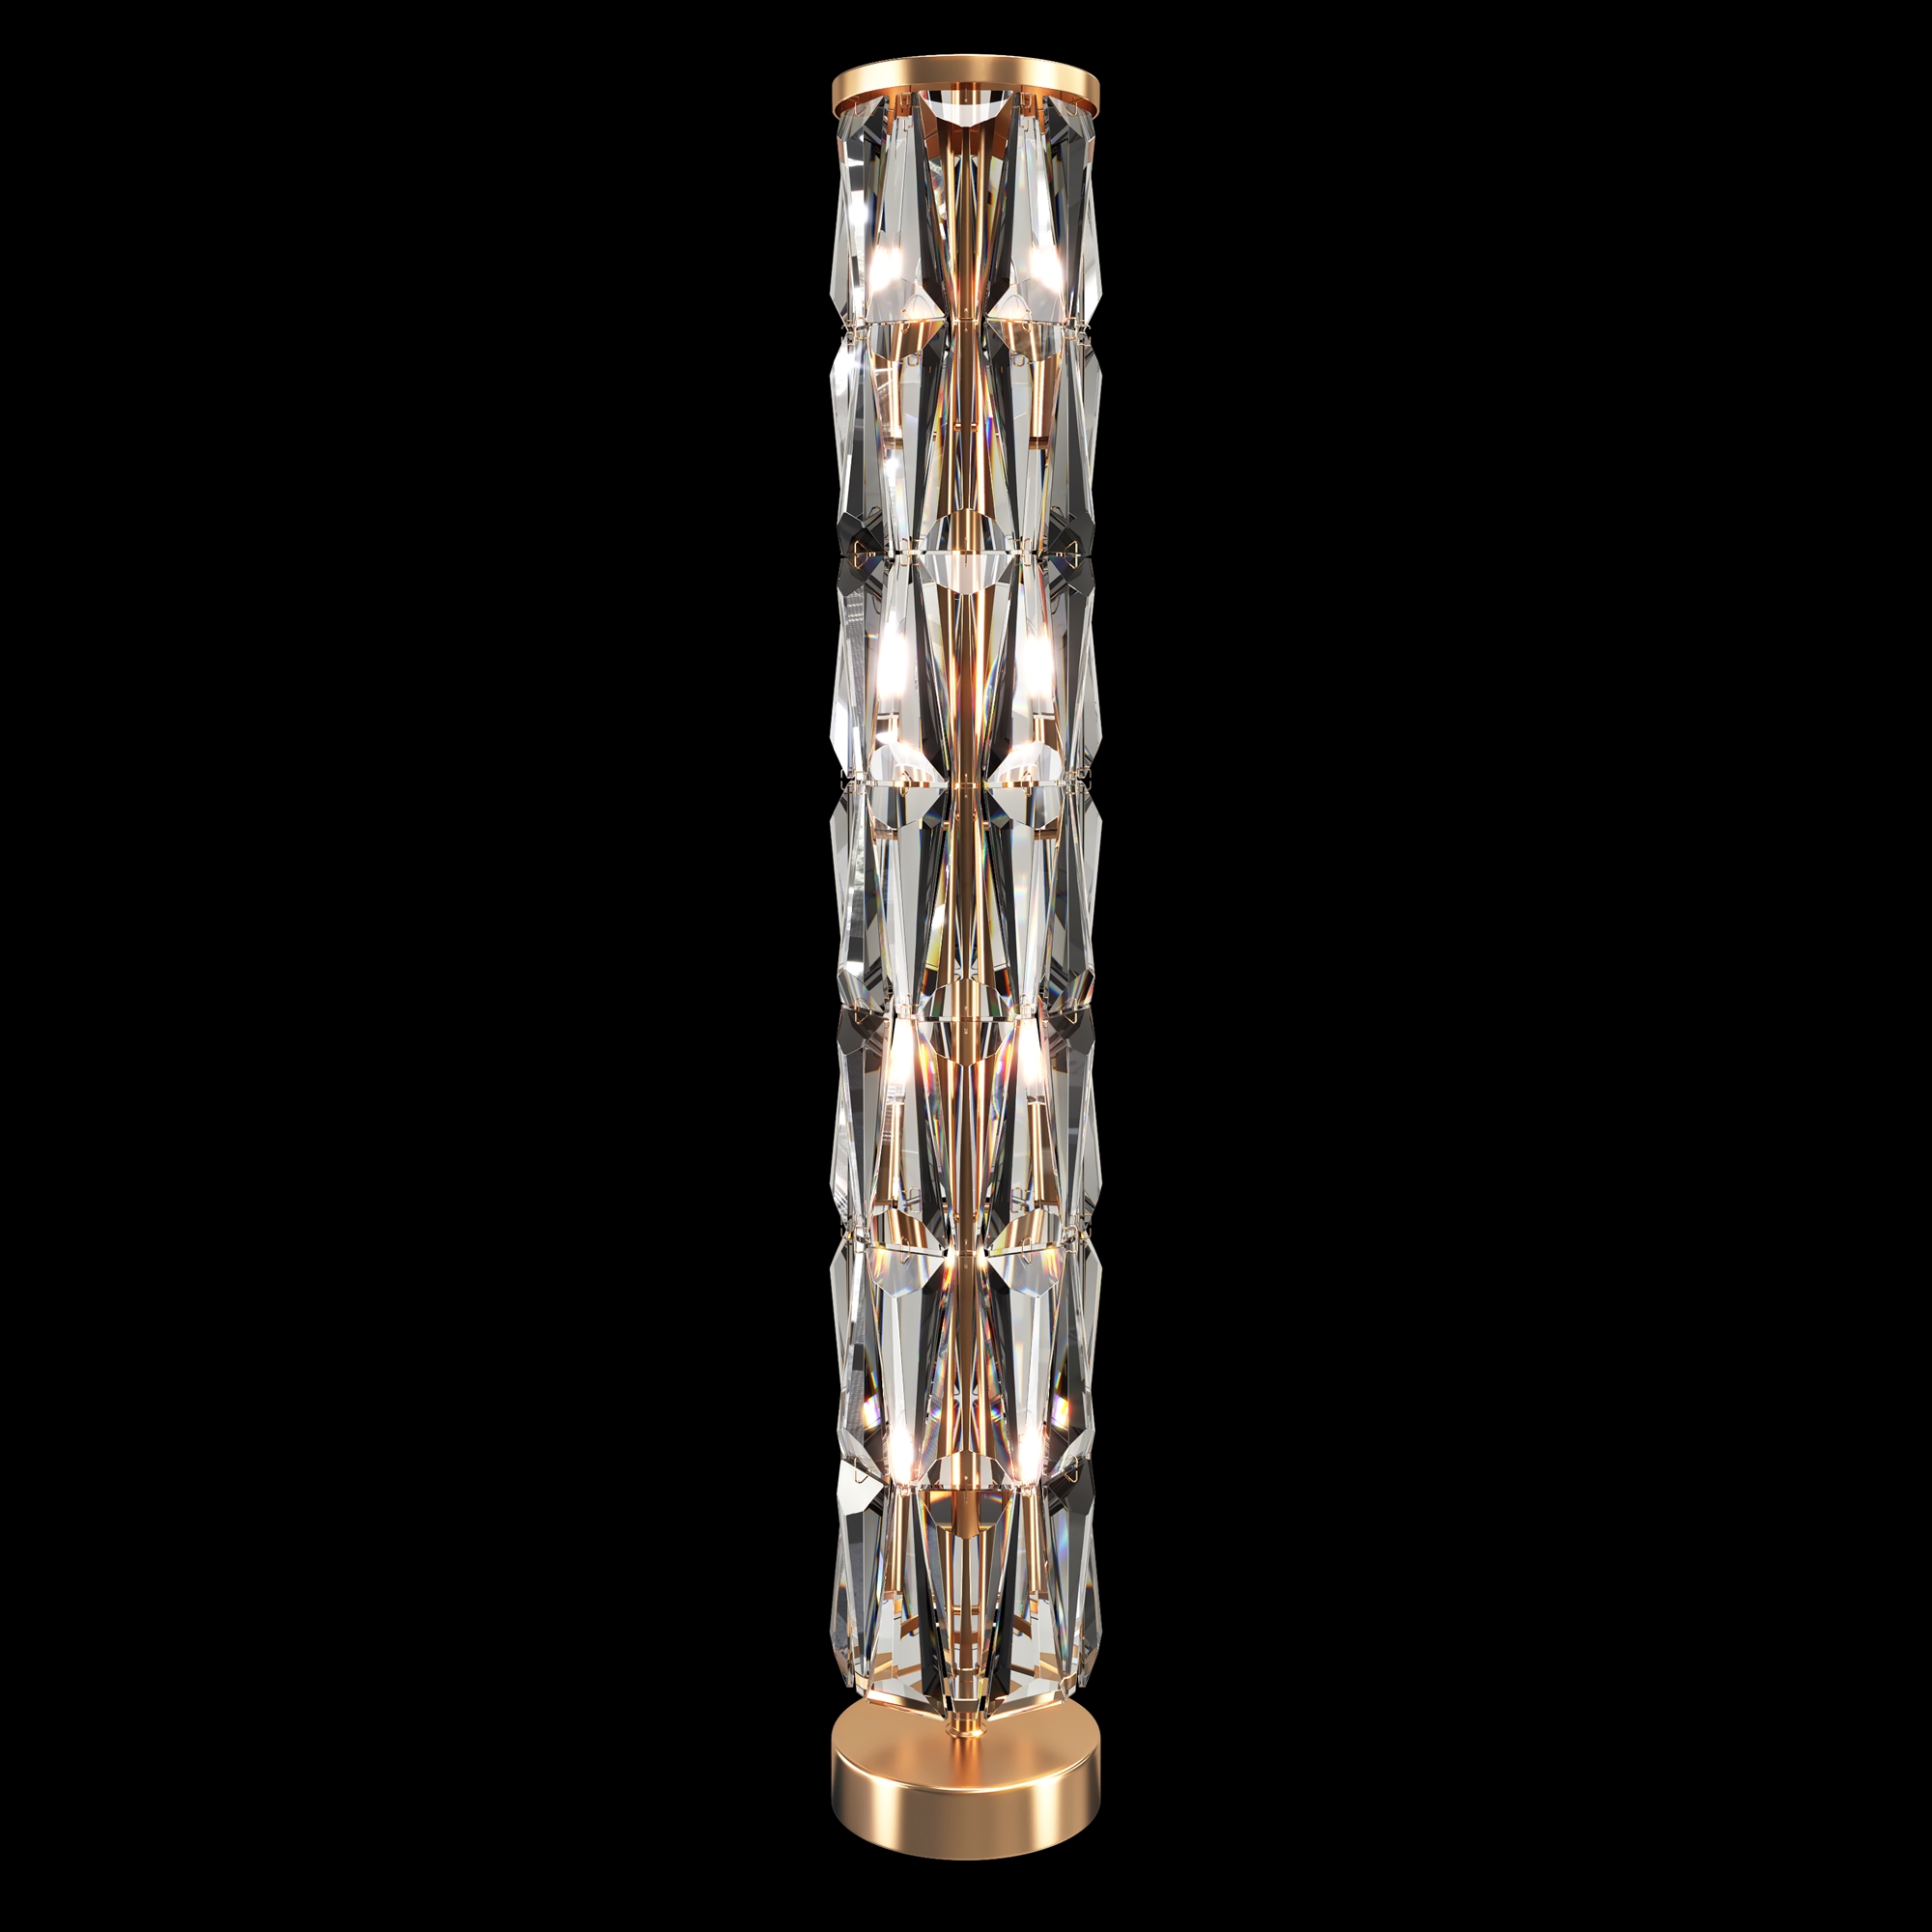 Maytoni Puntes Grīdas lp. 8xE14 60W (dimmable) Gold (Stainless Steel) (h1265; d200)